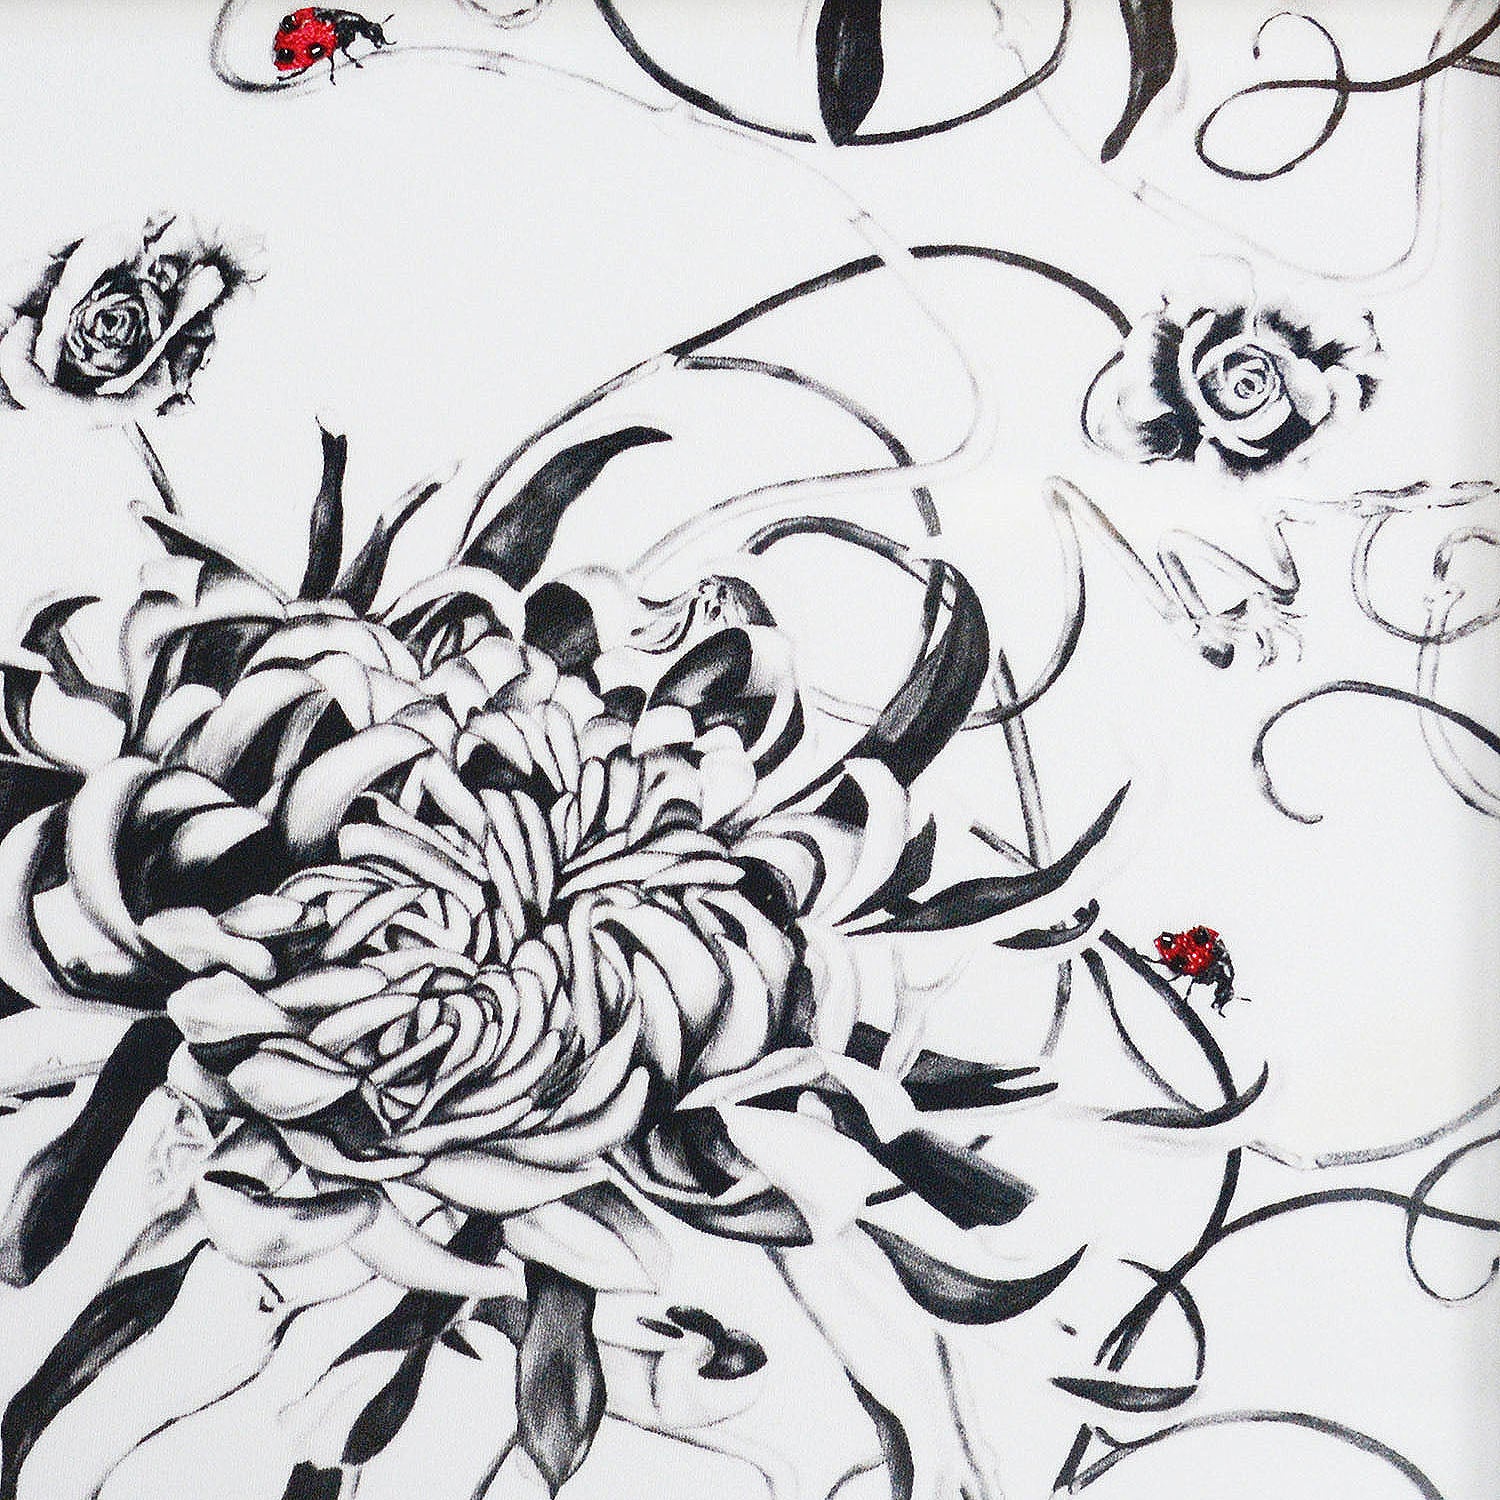 Artwork with monochrome floral design and hand embroidered ladybirds 